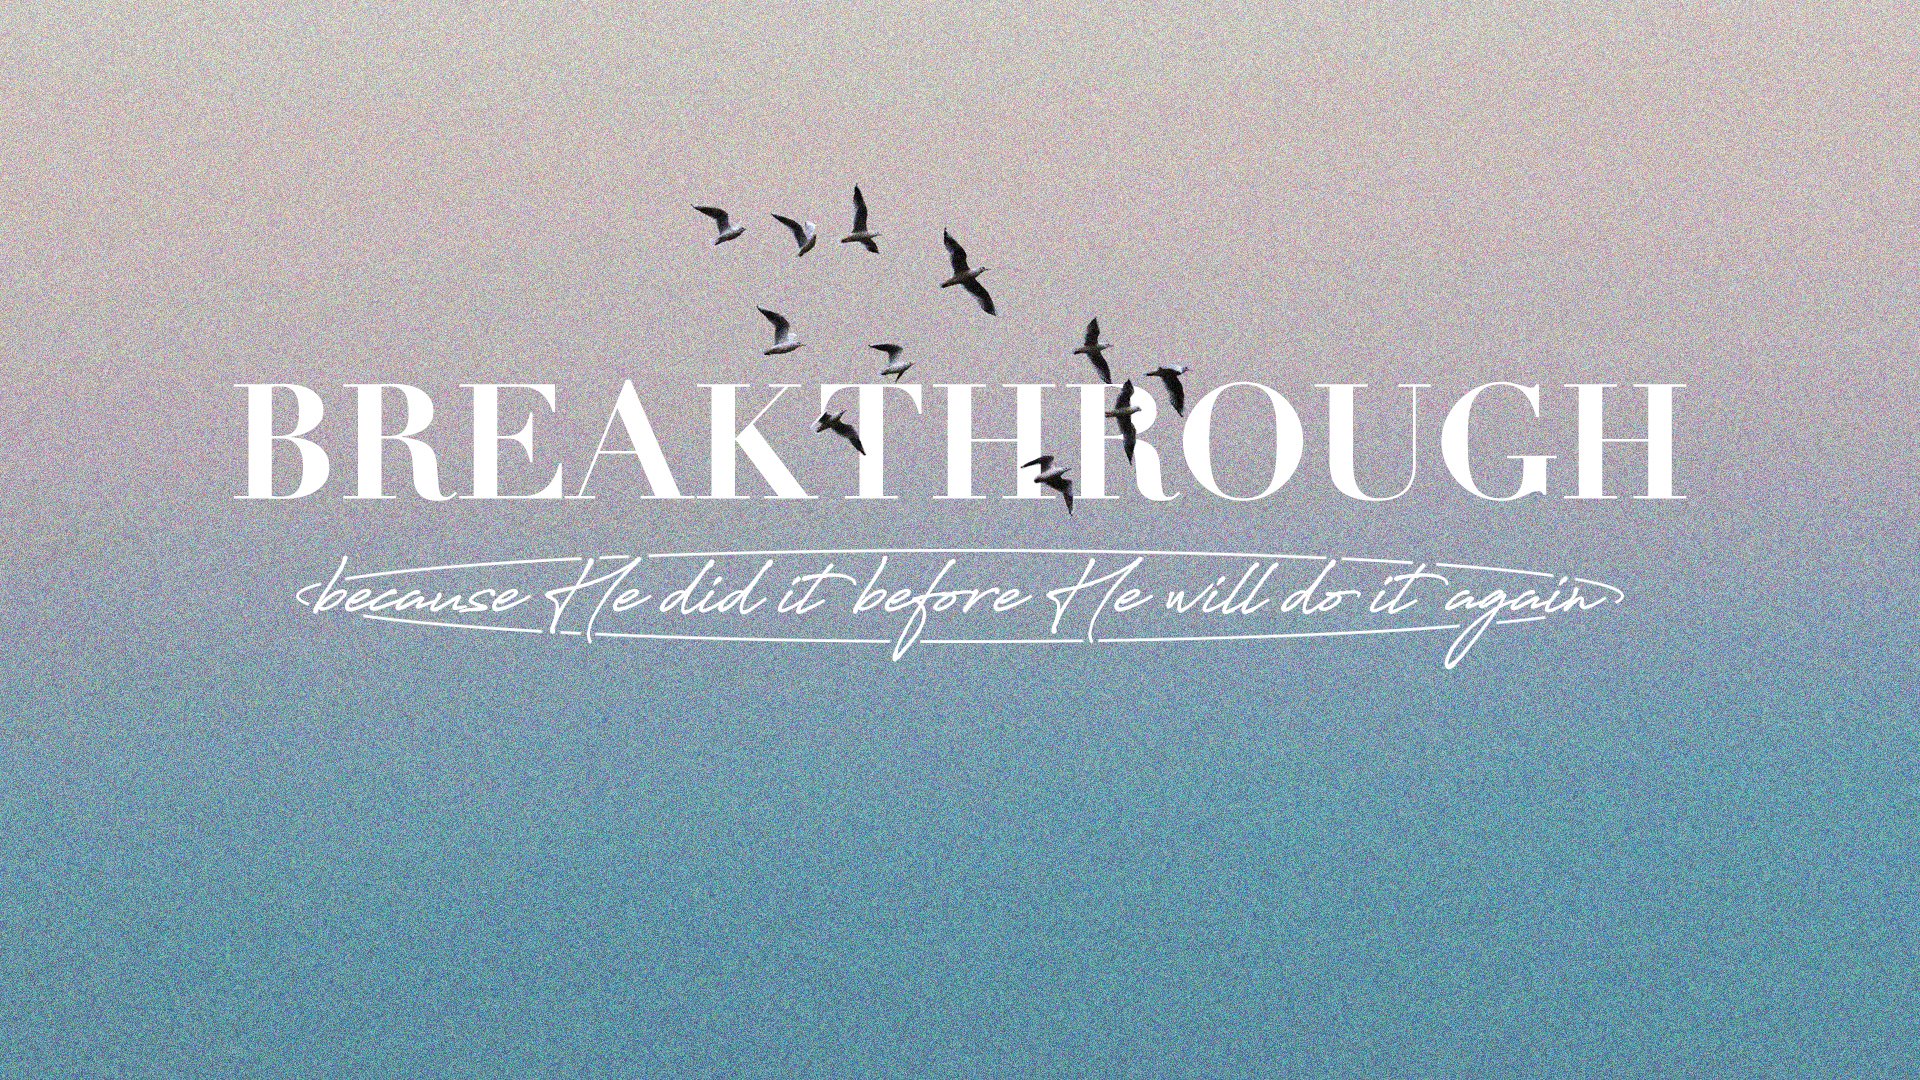 Breakthrough - Because He Did It Before He Will Do It Again